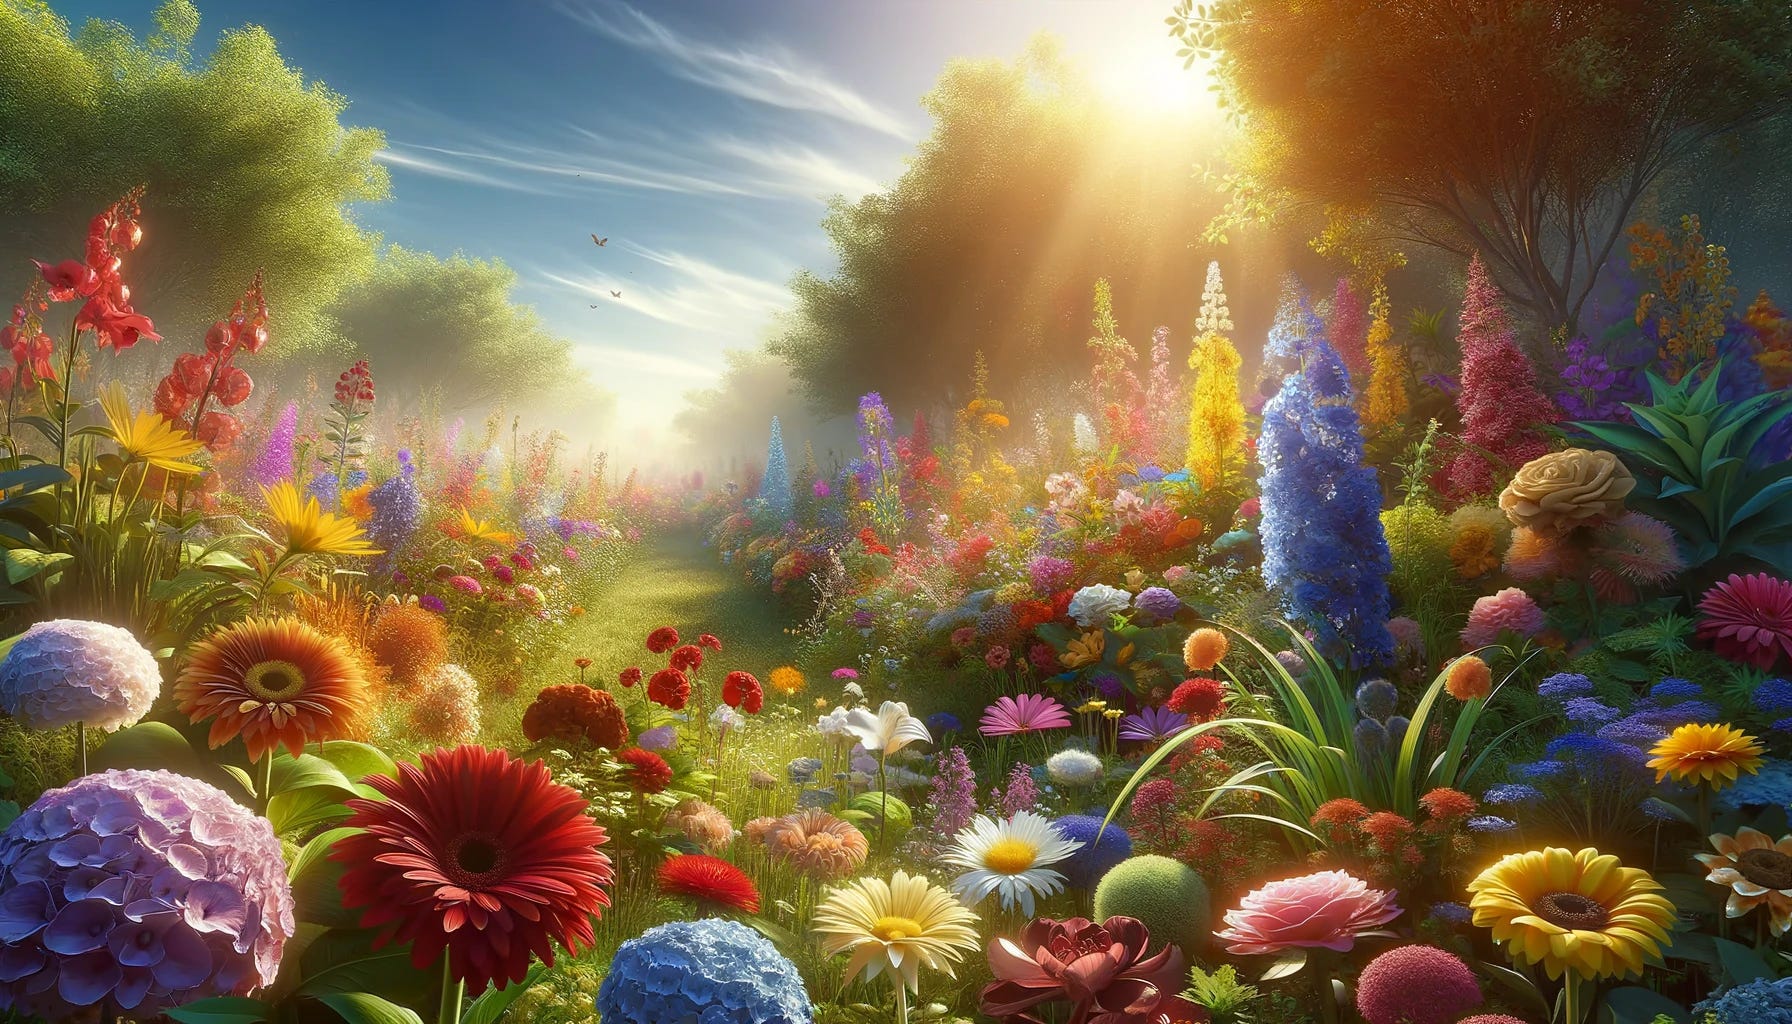 Flowers blossoming on a field with sun rays falling on the flowers